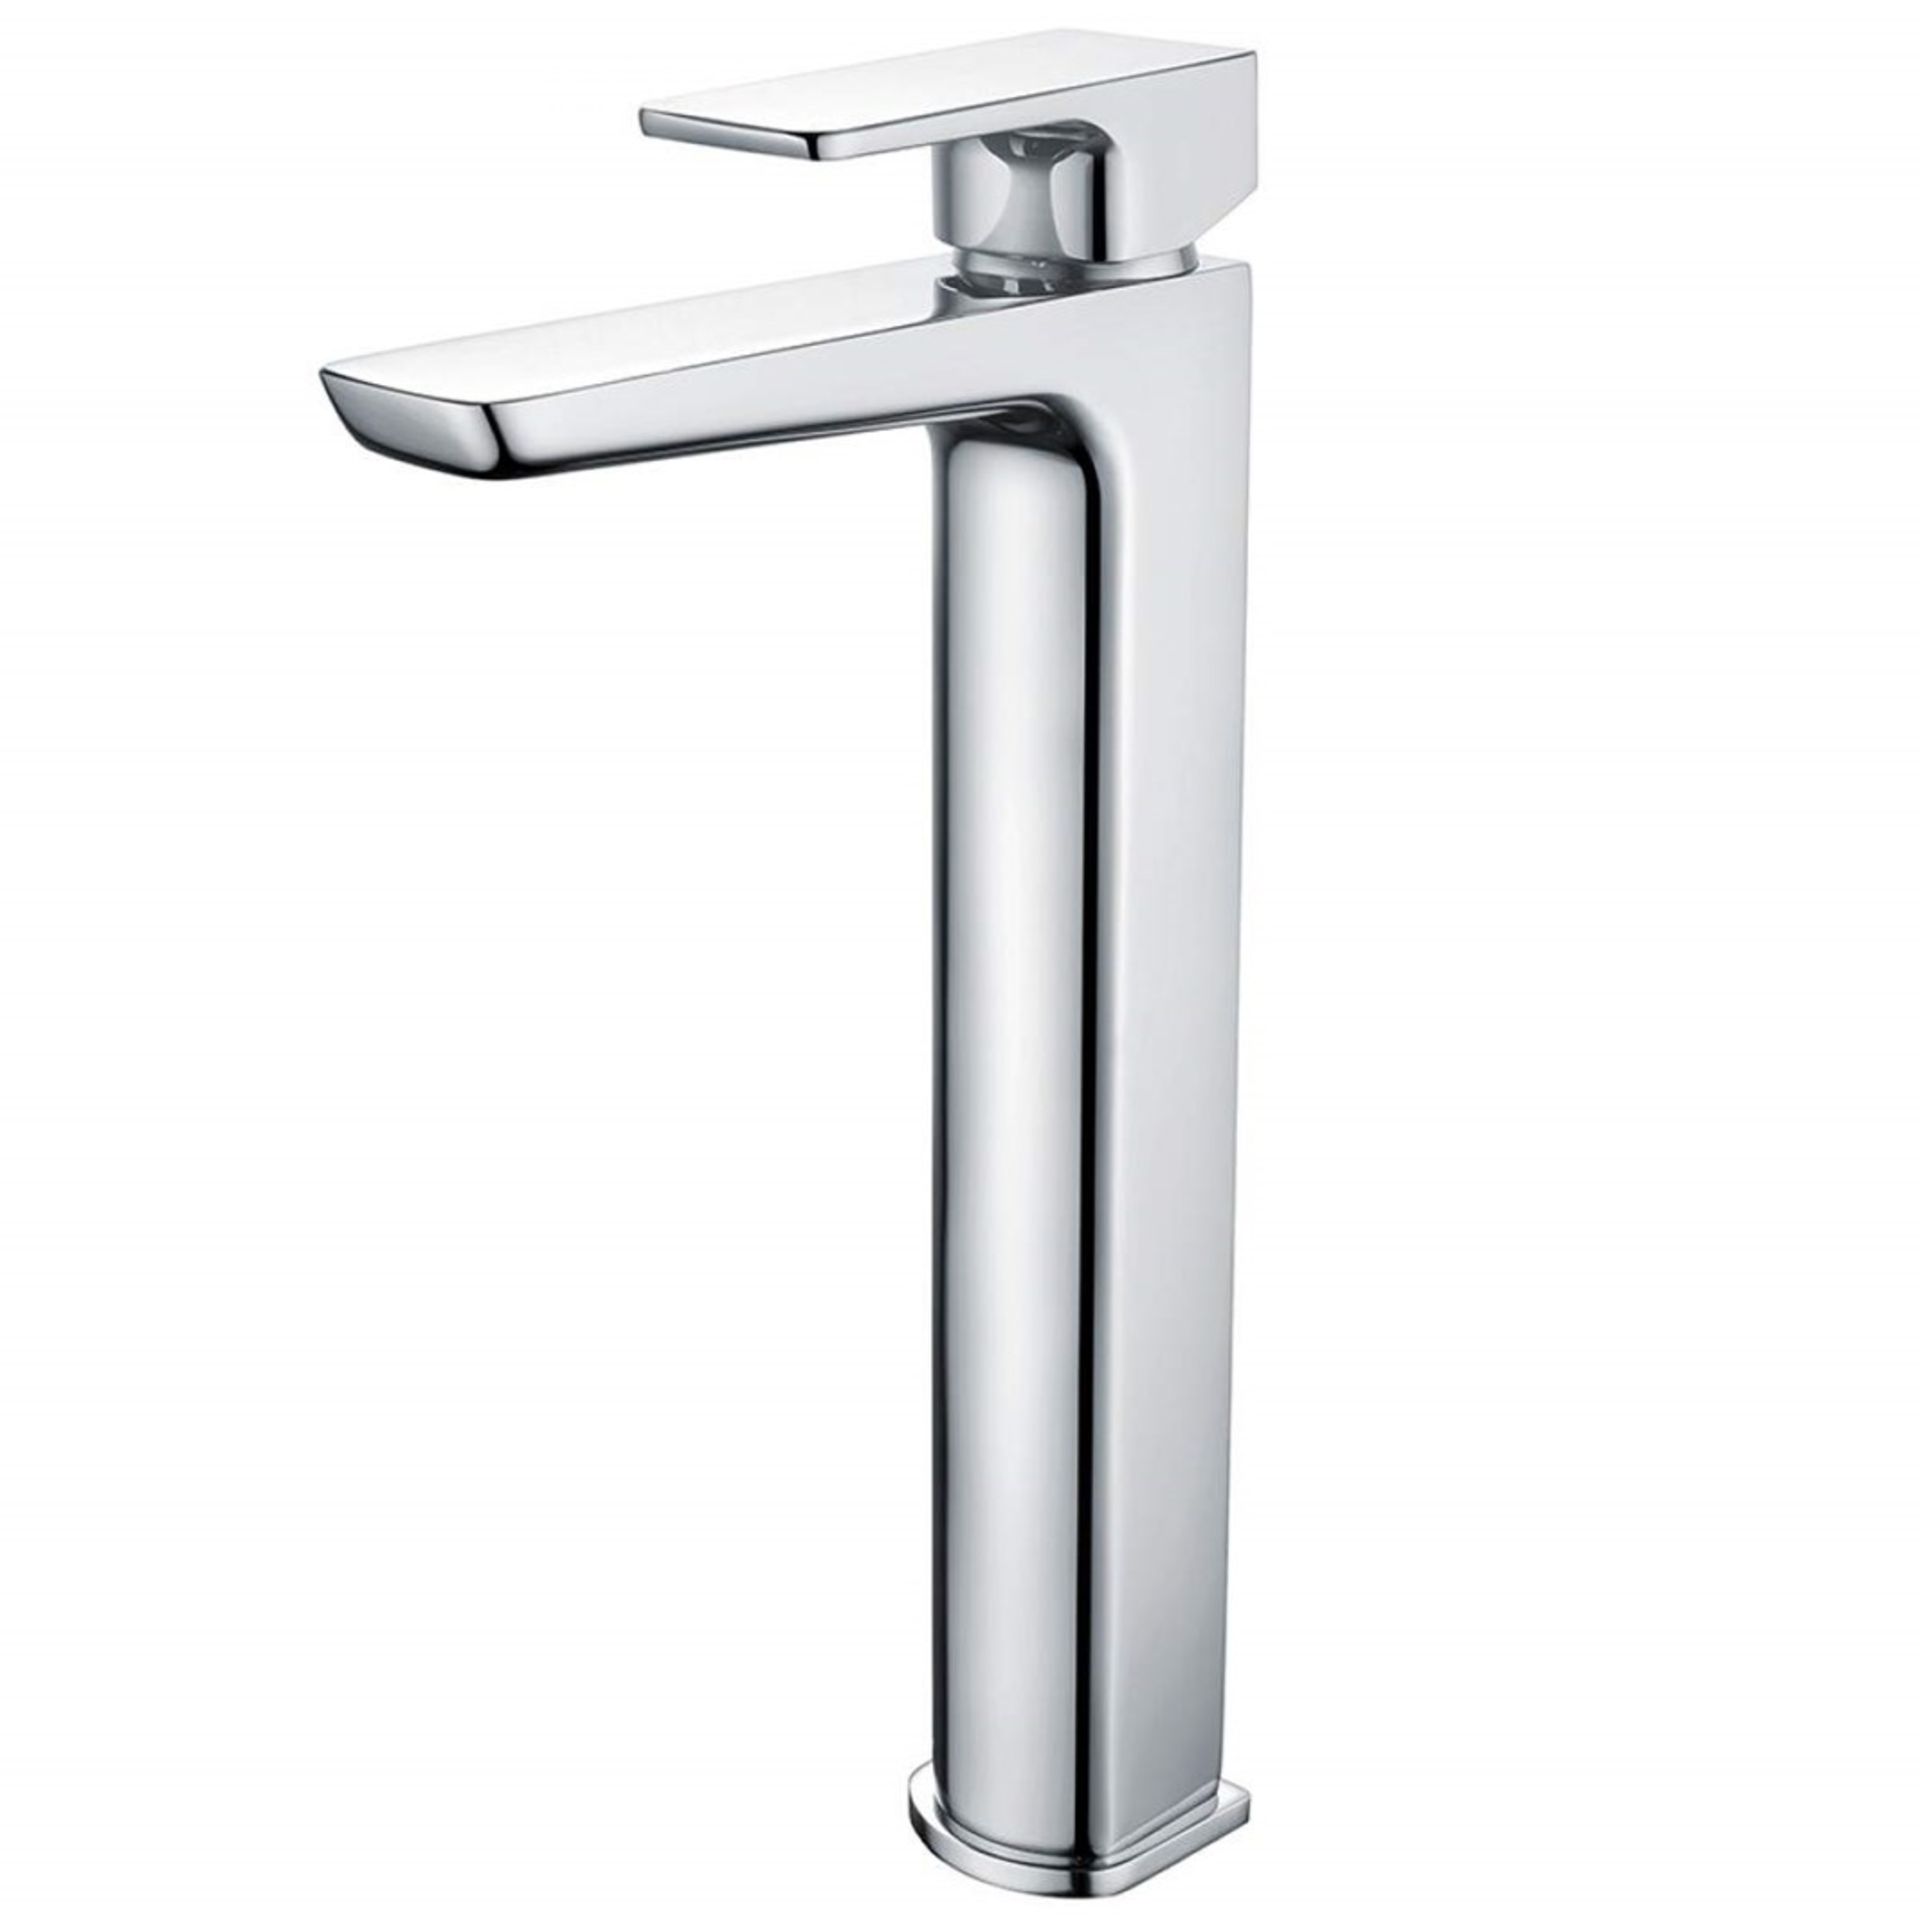 New & Boxed Cube Chrome High Rise Basin Mixer Tap. Tb8004 Perfect For Counter Top Basins, Made From